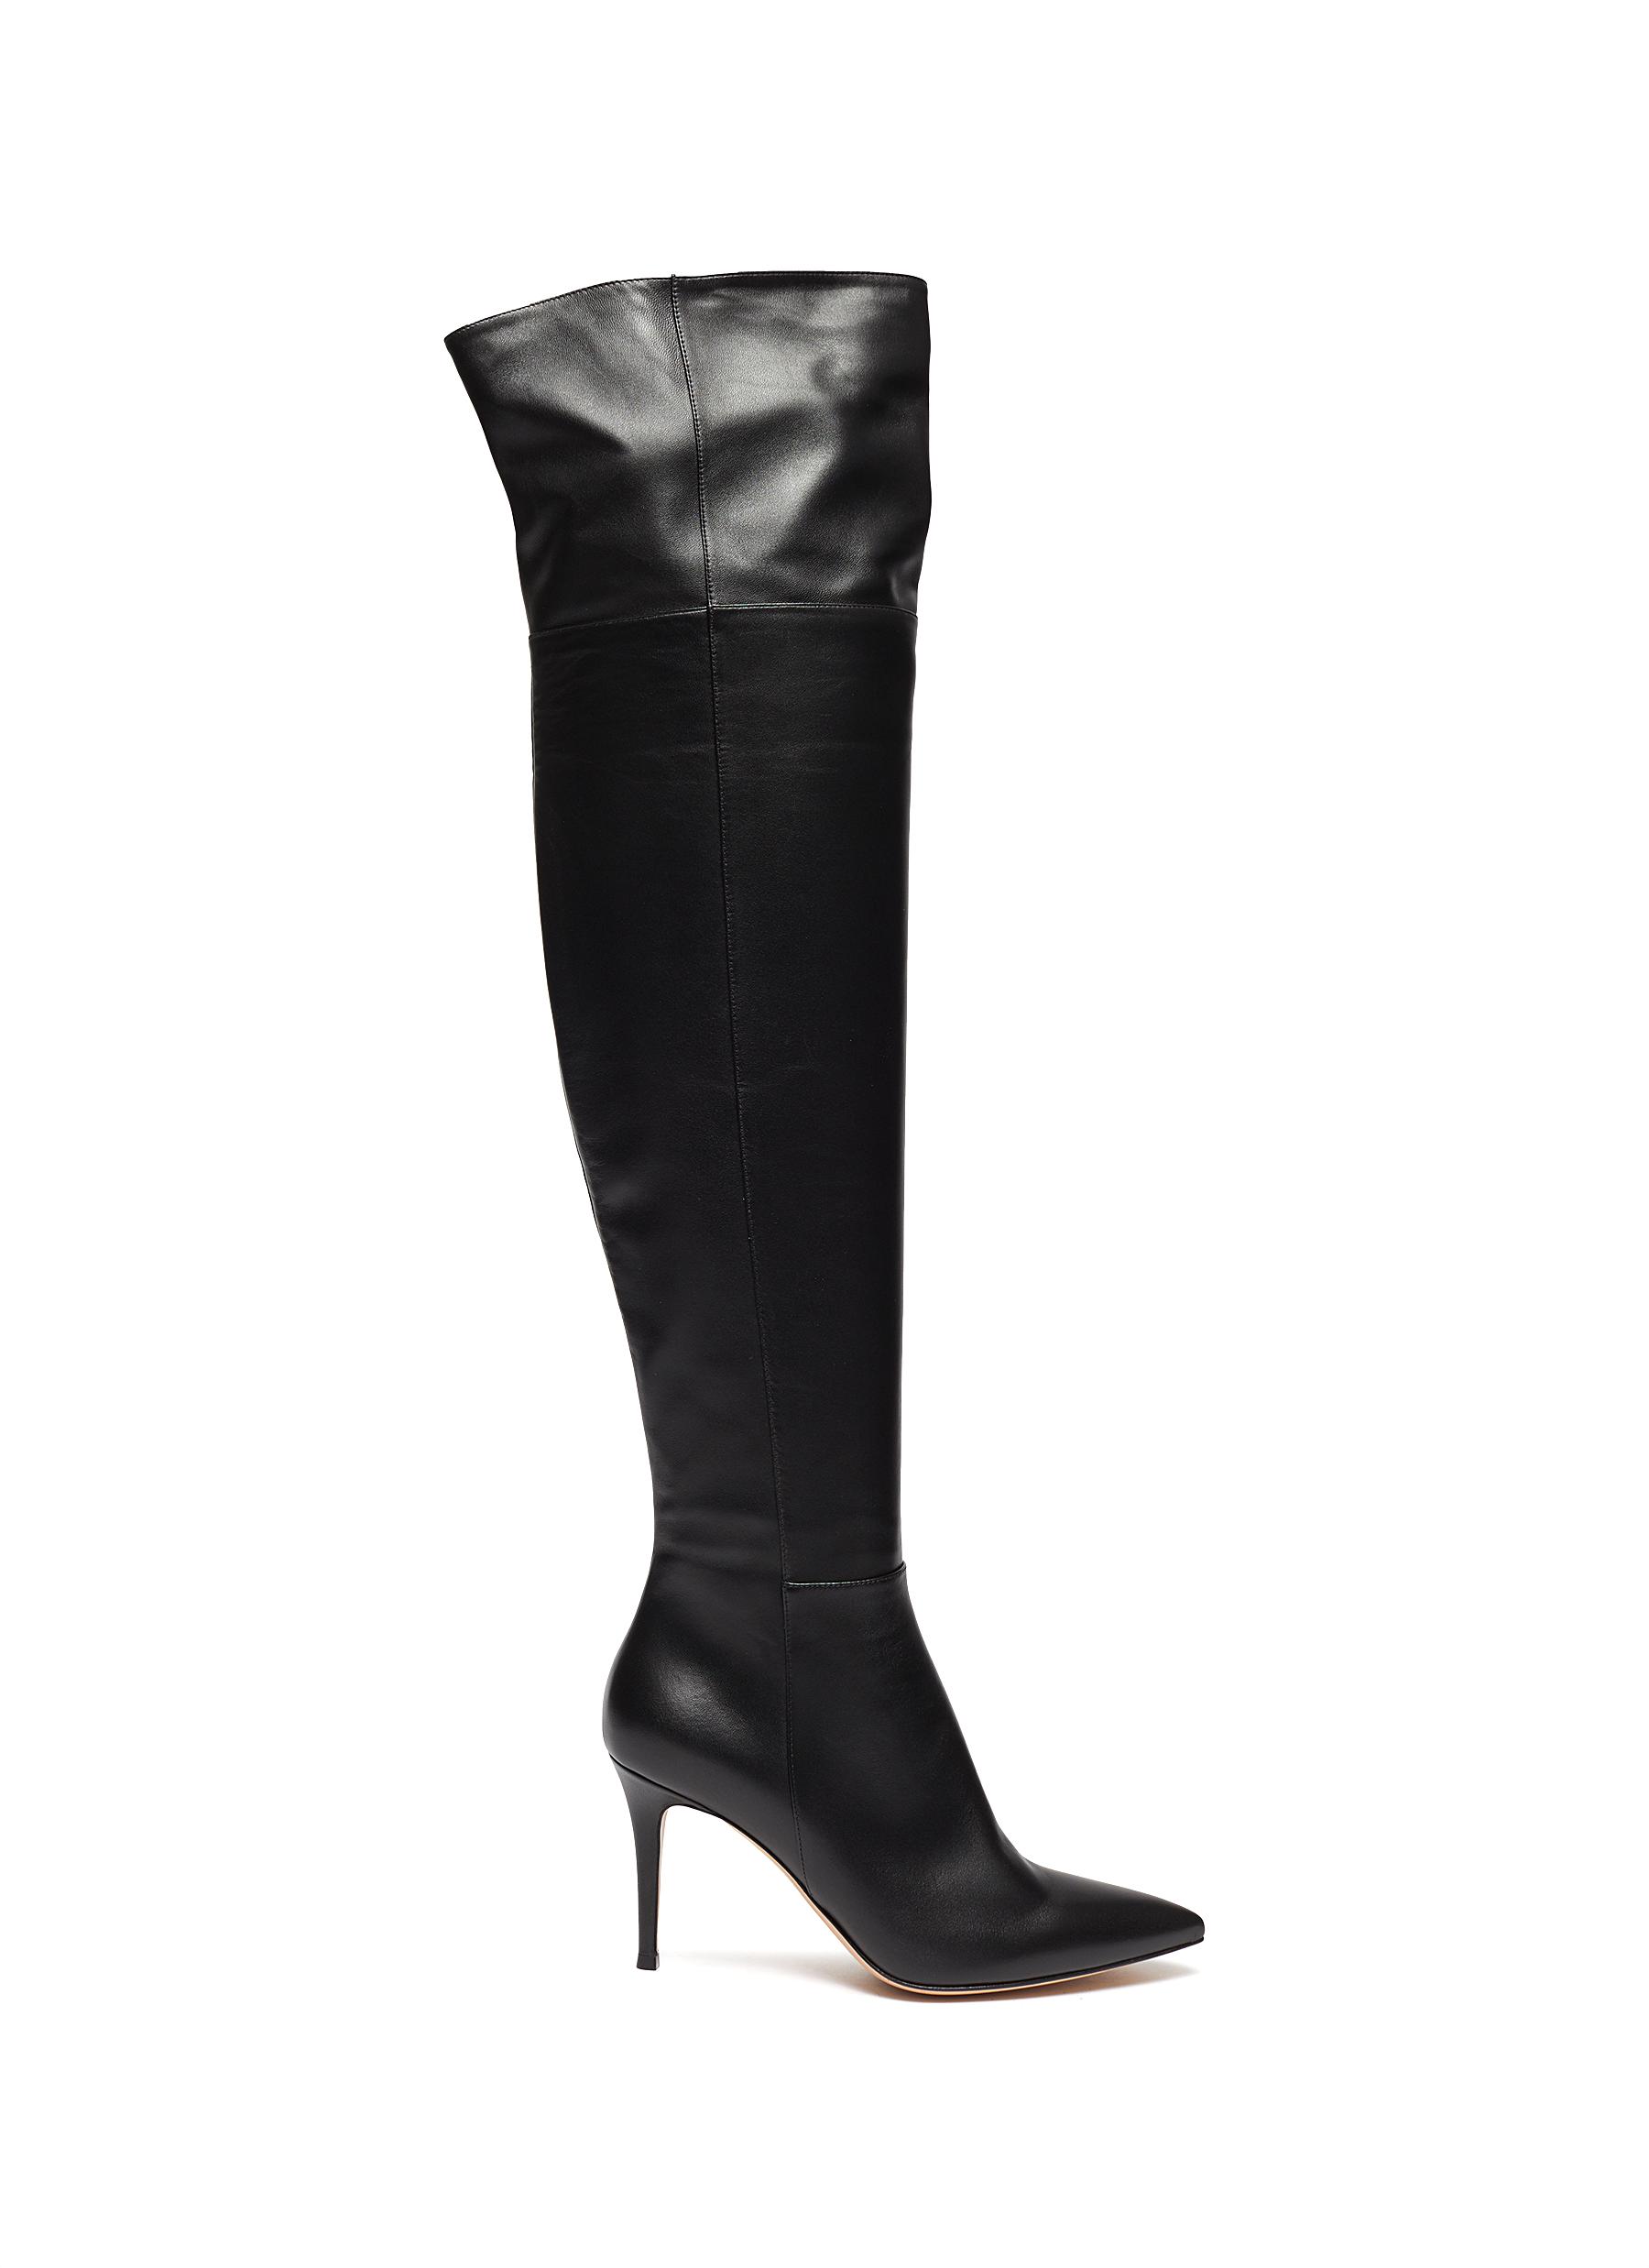 Gianvito Rossi Leather Thigh High Boots In Black | ModeSens